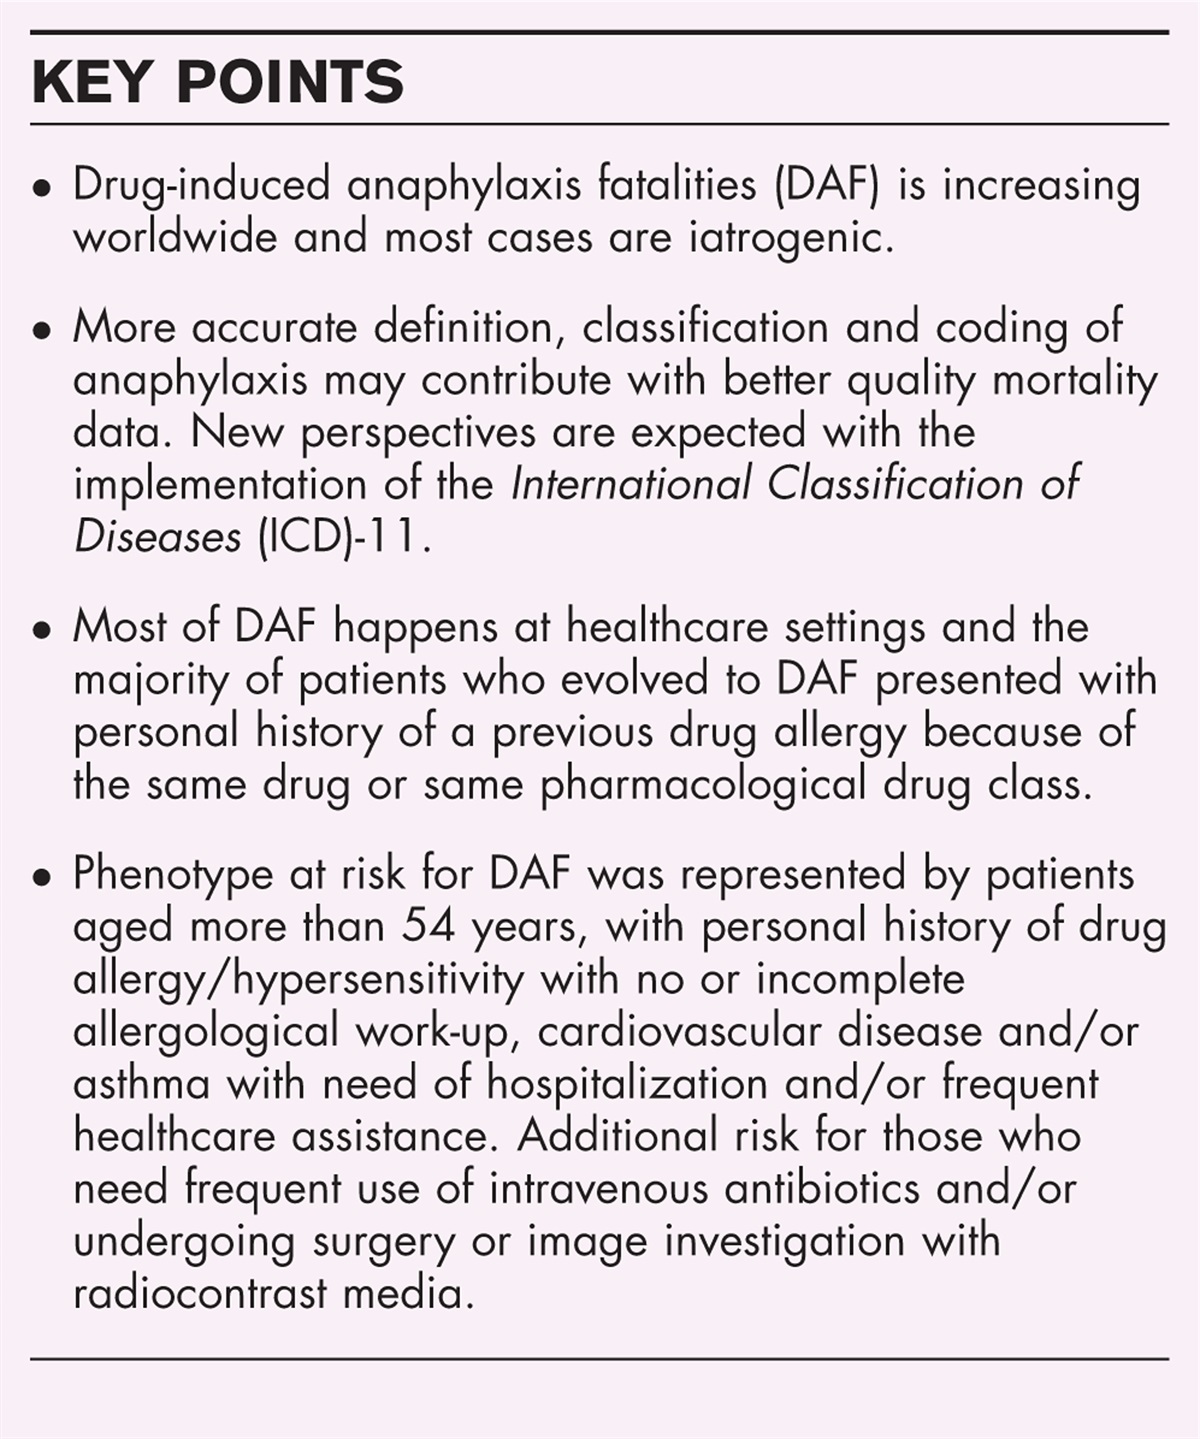 Global patterns of drug allergy-induced fatalities: a wake-up call to prevent avoidable deaths